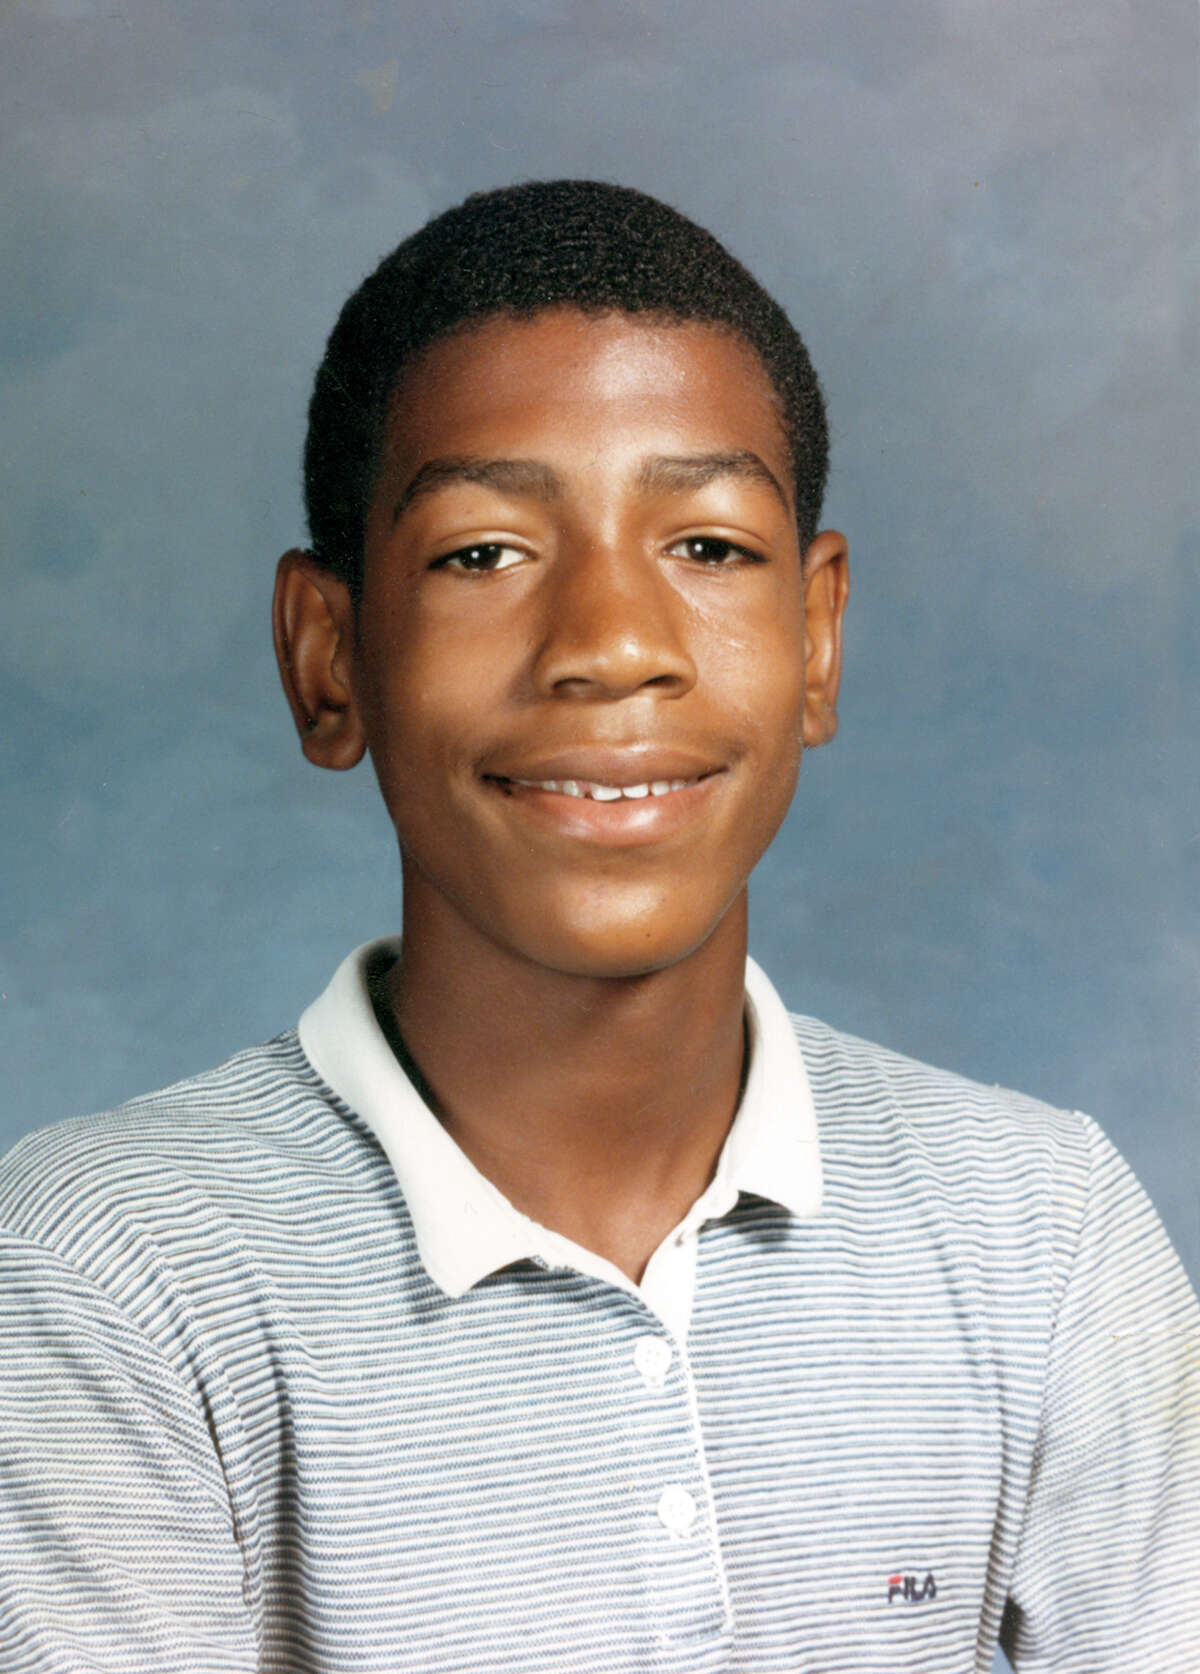 Kevin Ollie in his seventh grade photo.